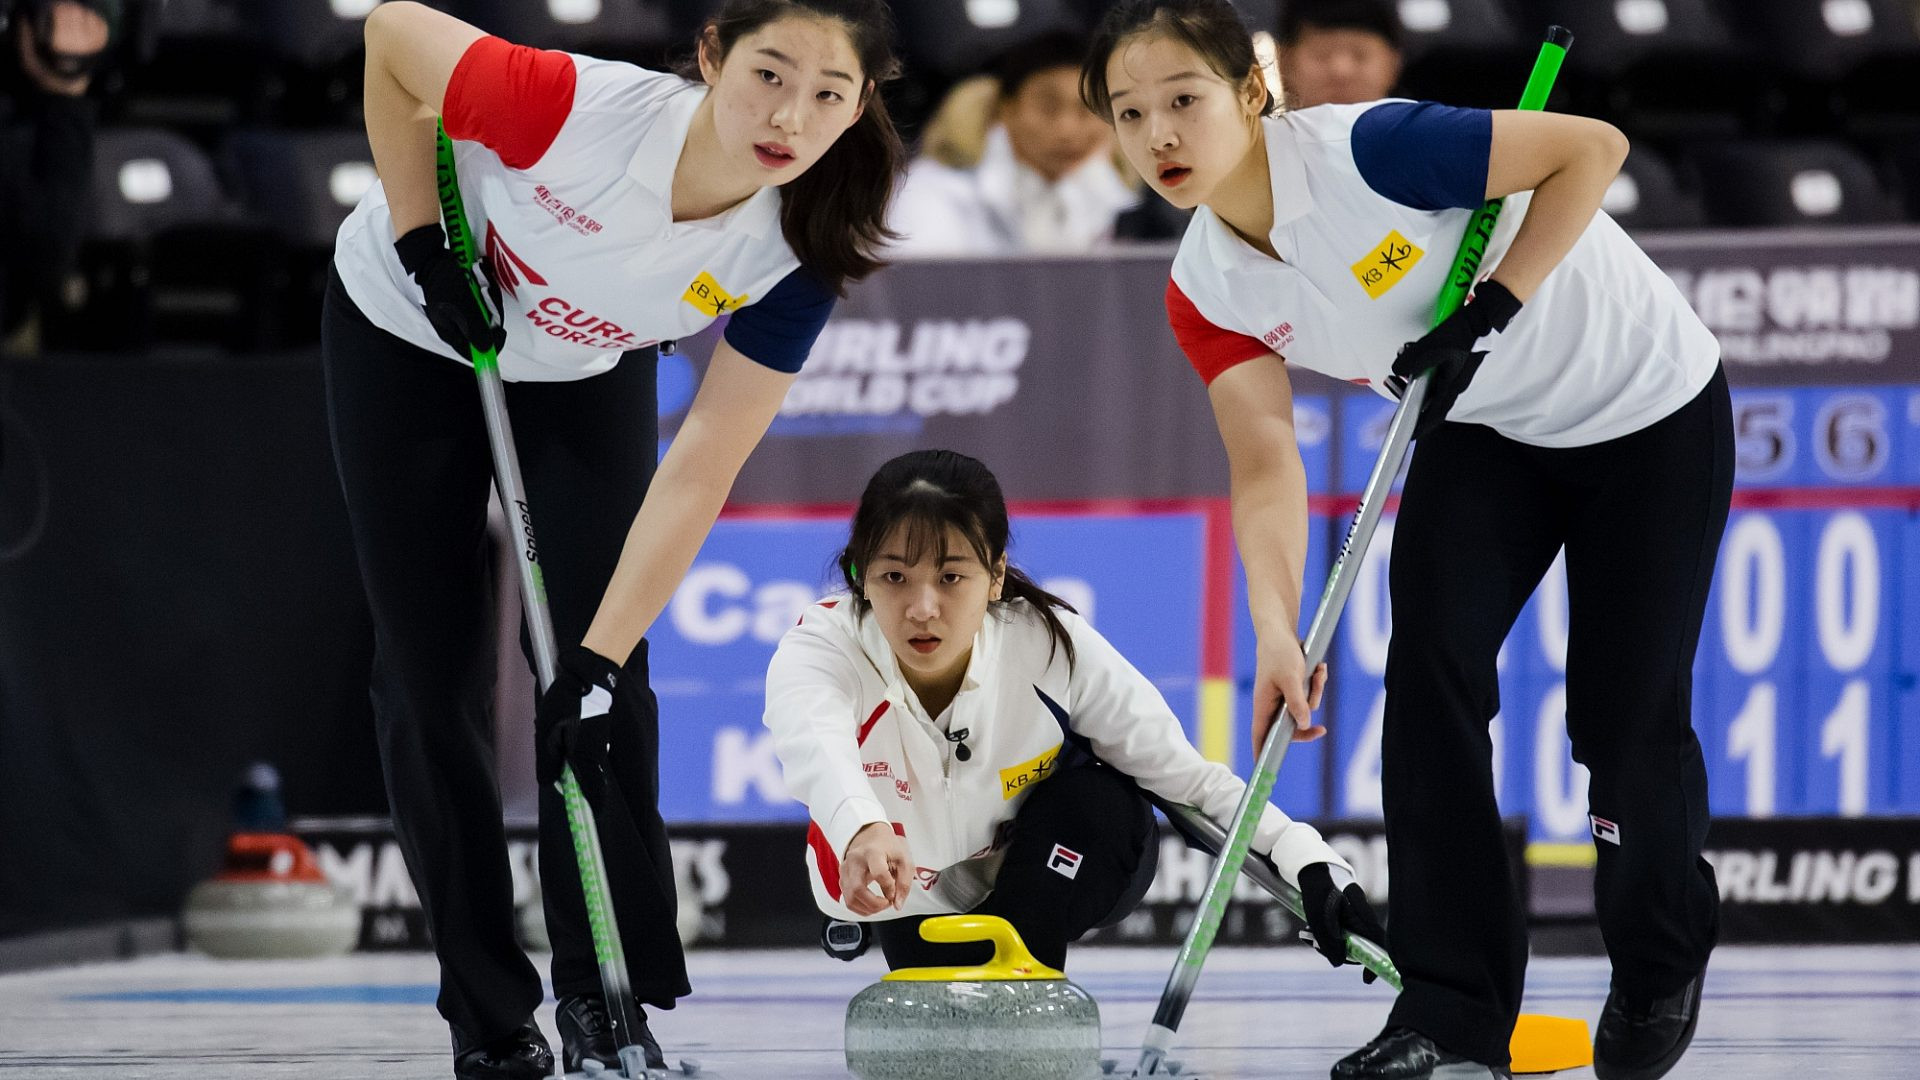 South Korea recorded two wins today at the Curling World Cup in Omaha to share the lead of Group A with Canada as Olympic champions Sweden were knocked out of the tournament ©Curling World Cup